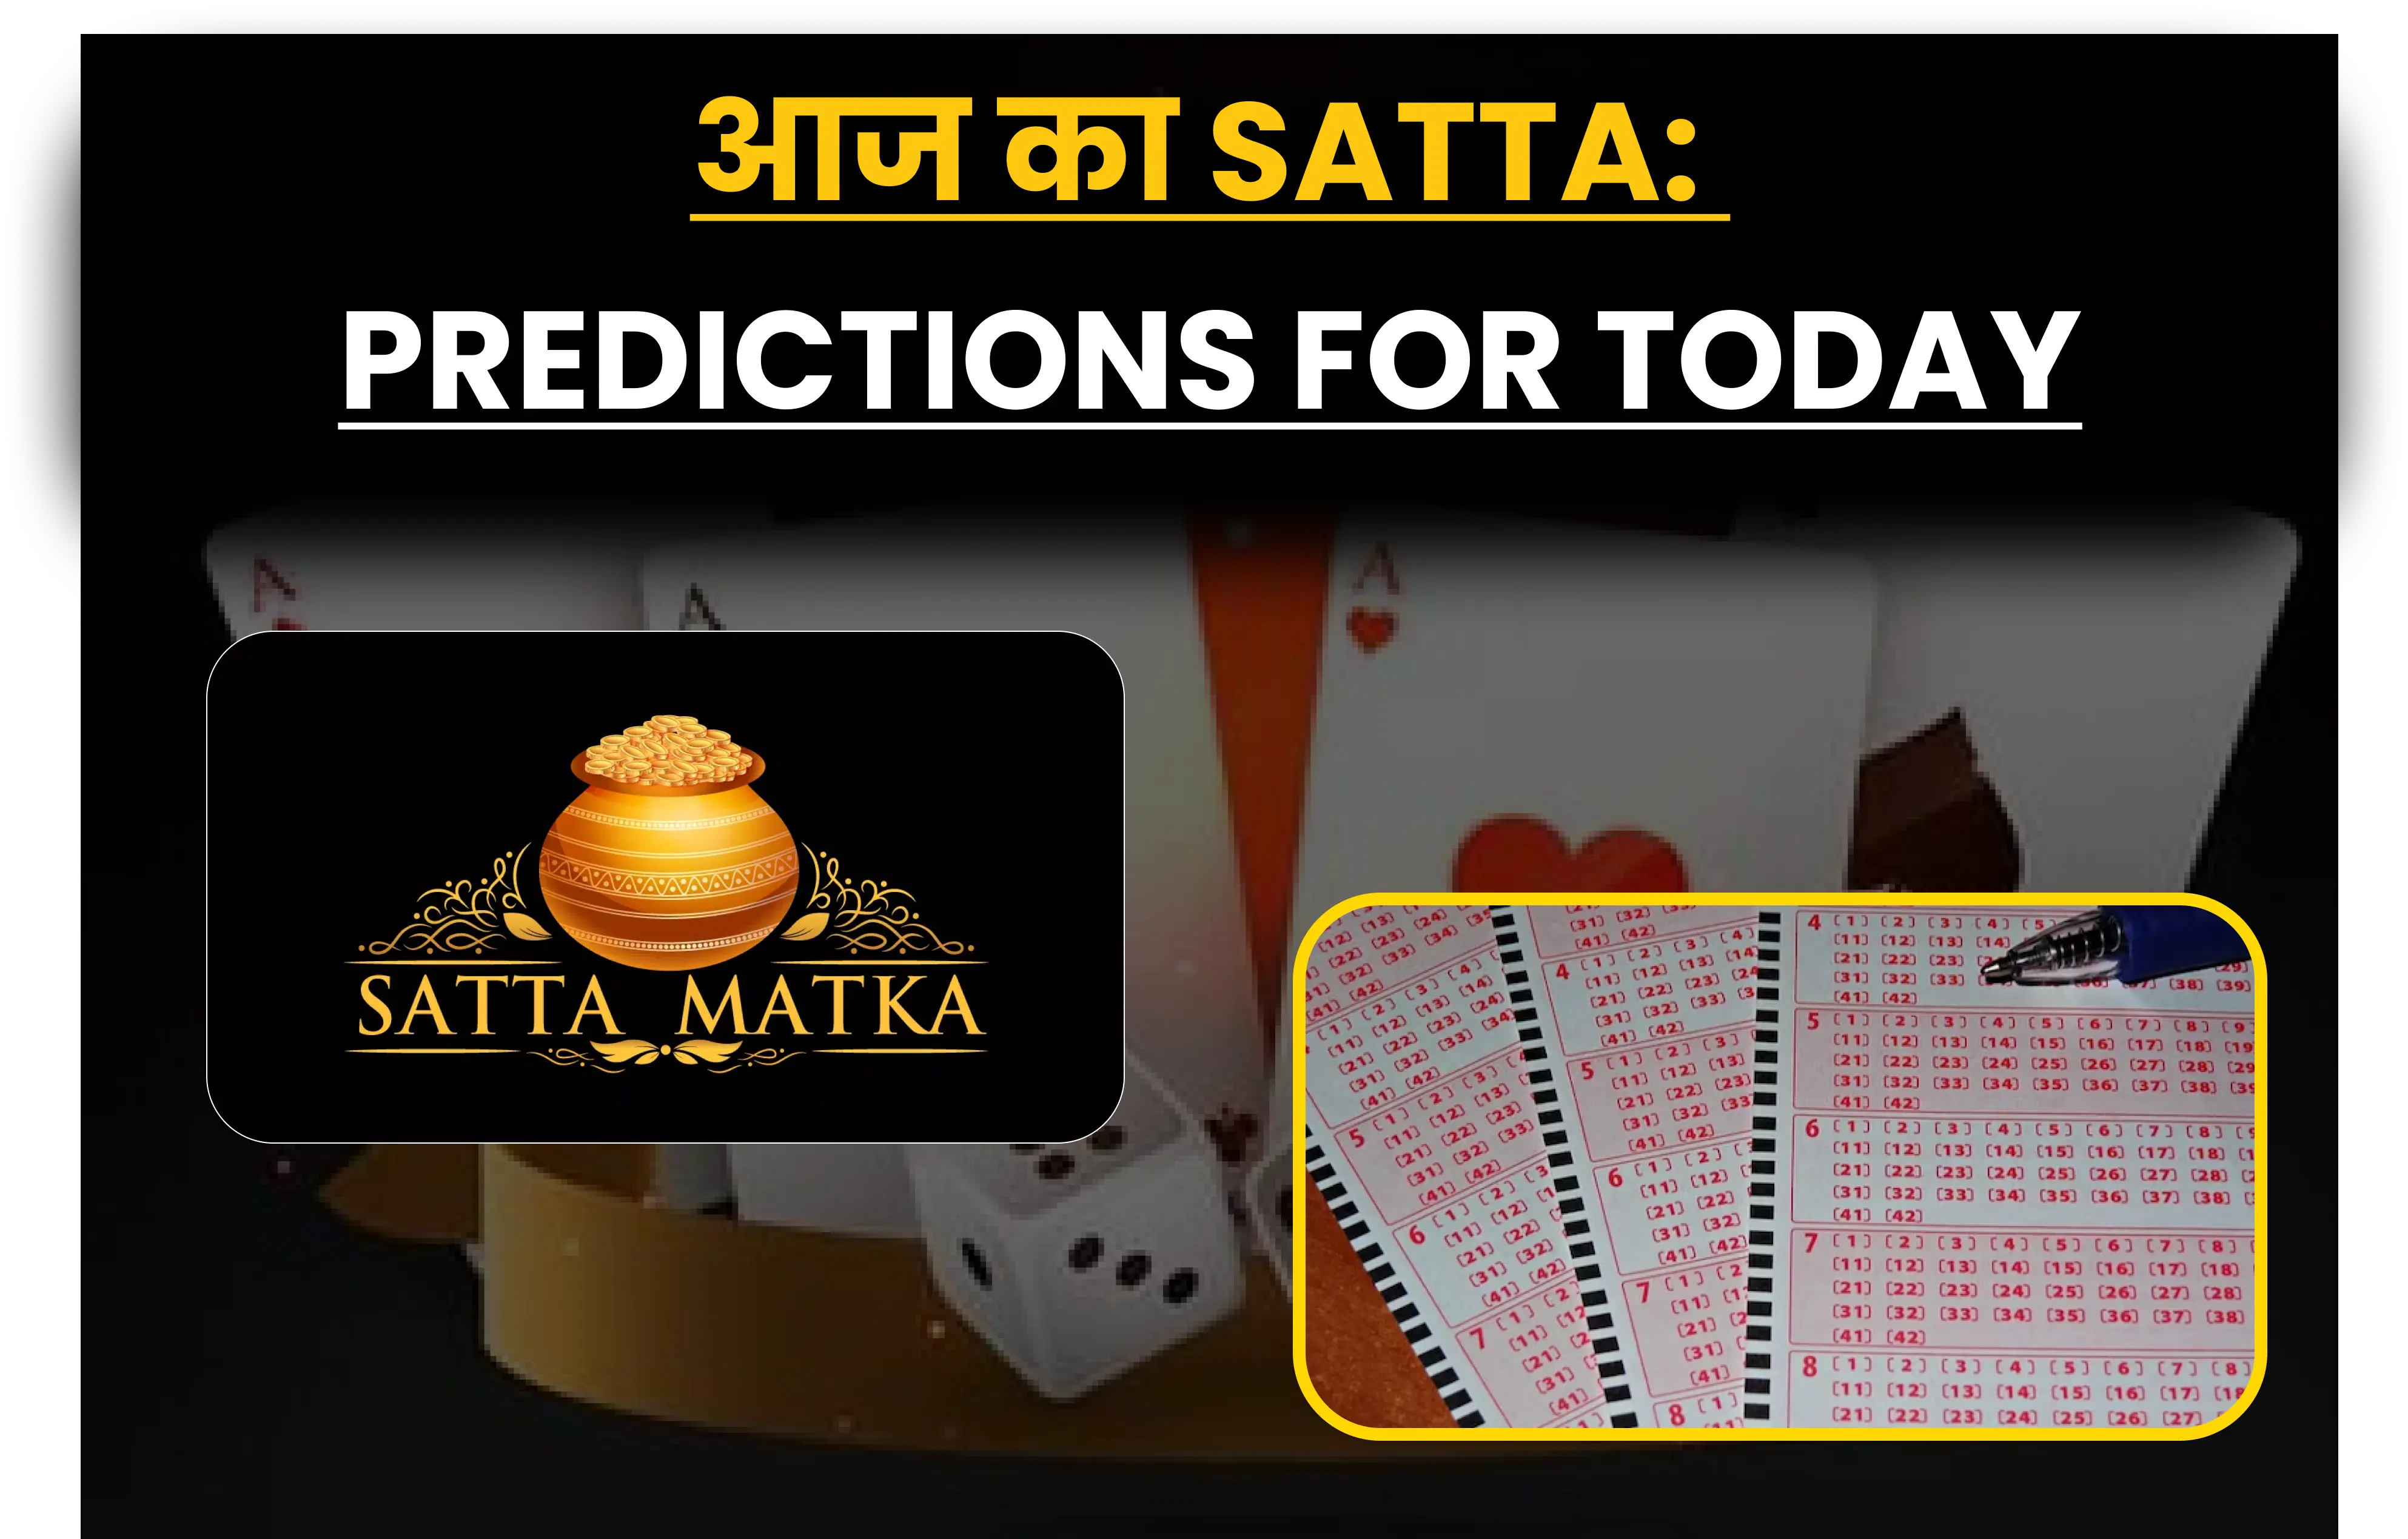 आज का Satta: Predictions for Today